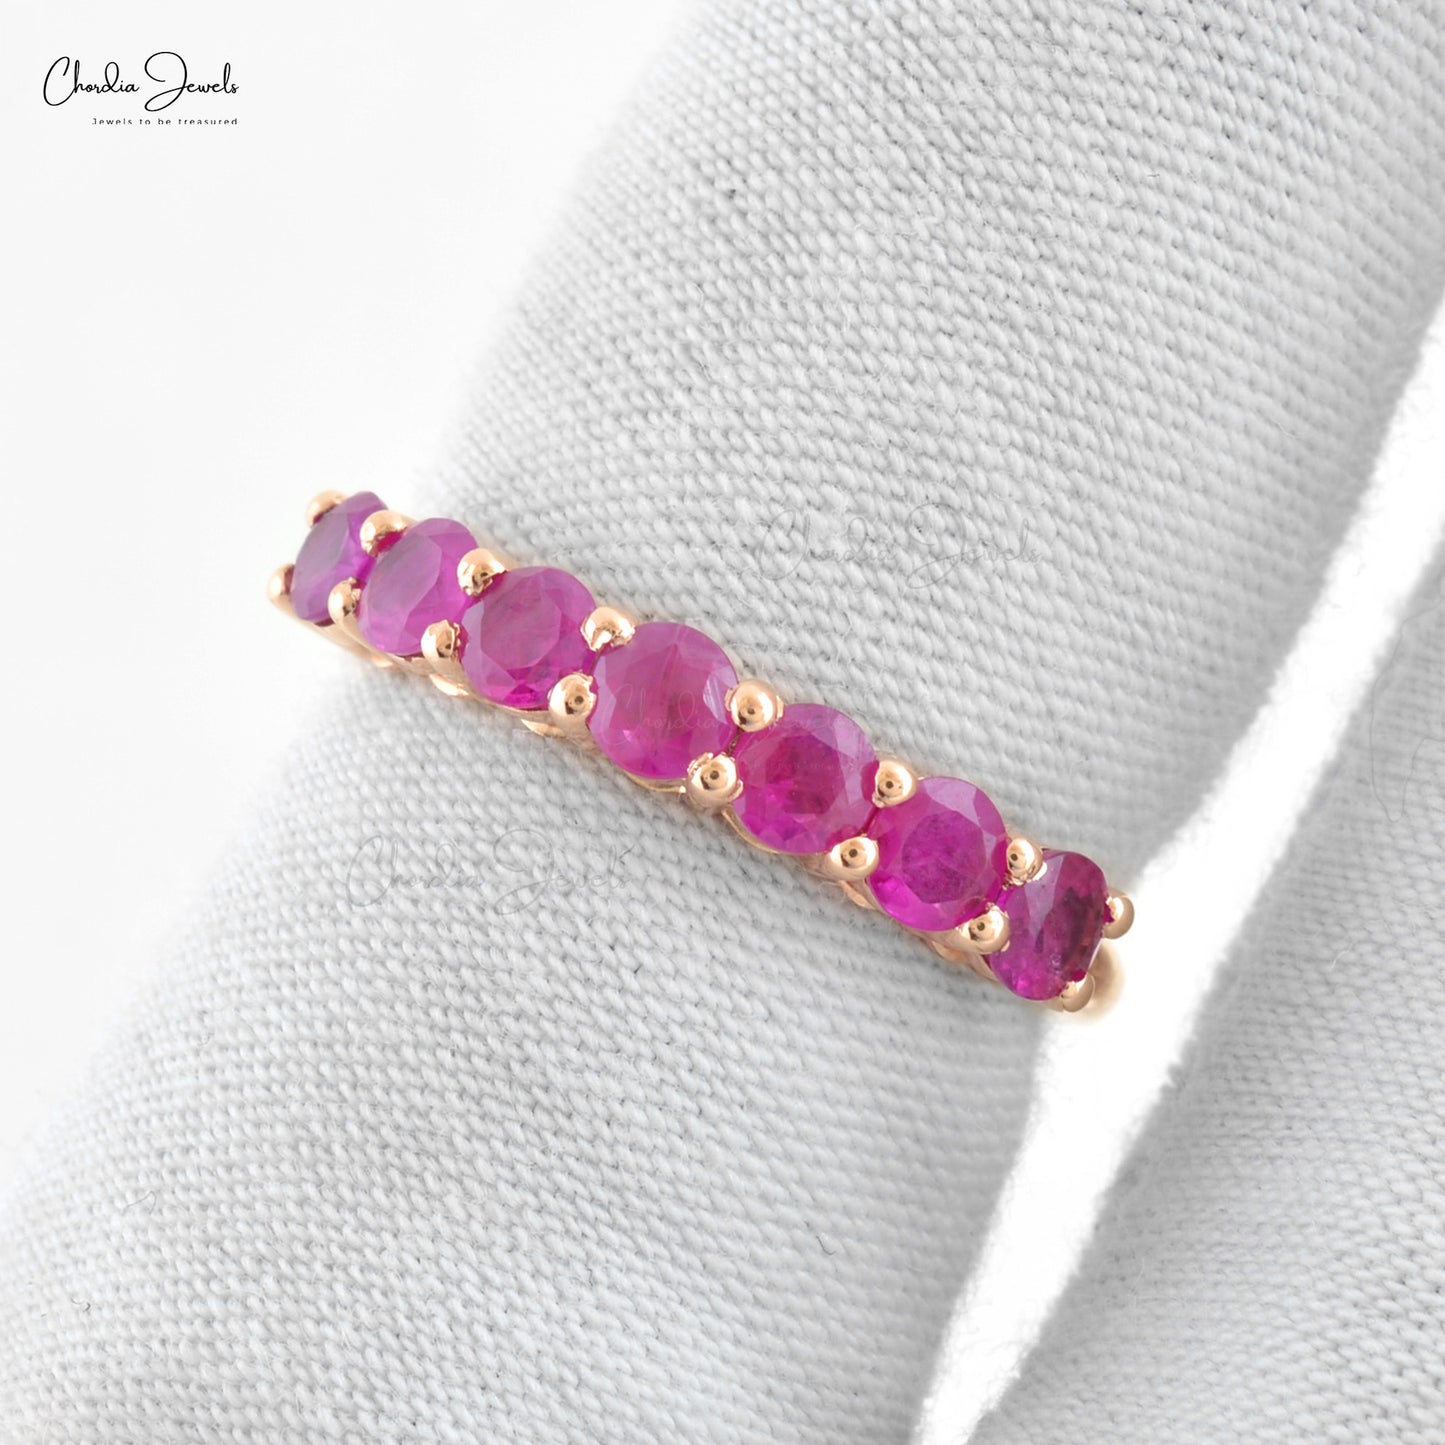 Natural Ruby 3mm Round Cut 0.70ct Gemstone Dainty Eternity Band 14k Solid Rose Gold Art Deco Wedding Eternity Bands